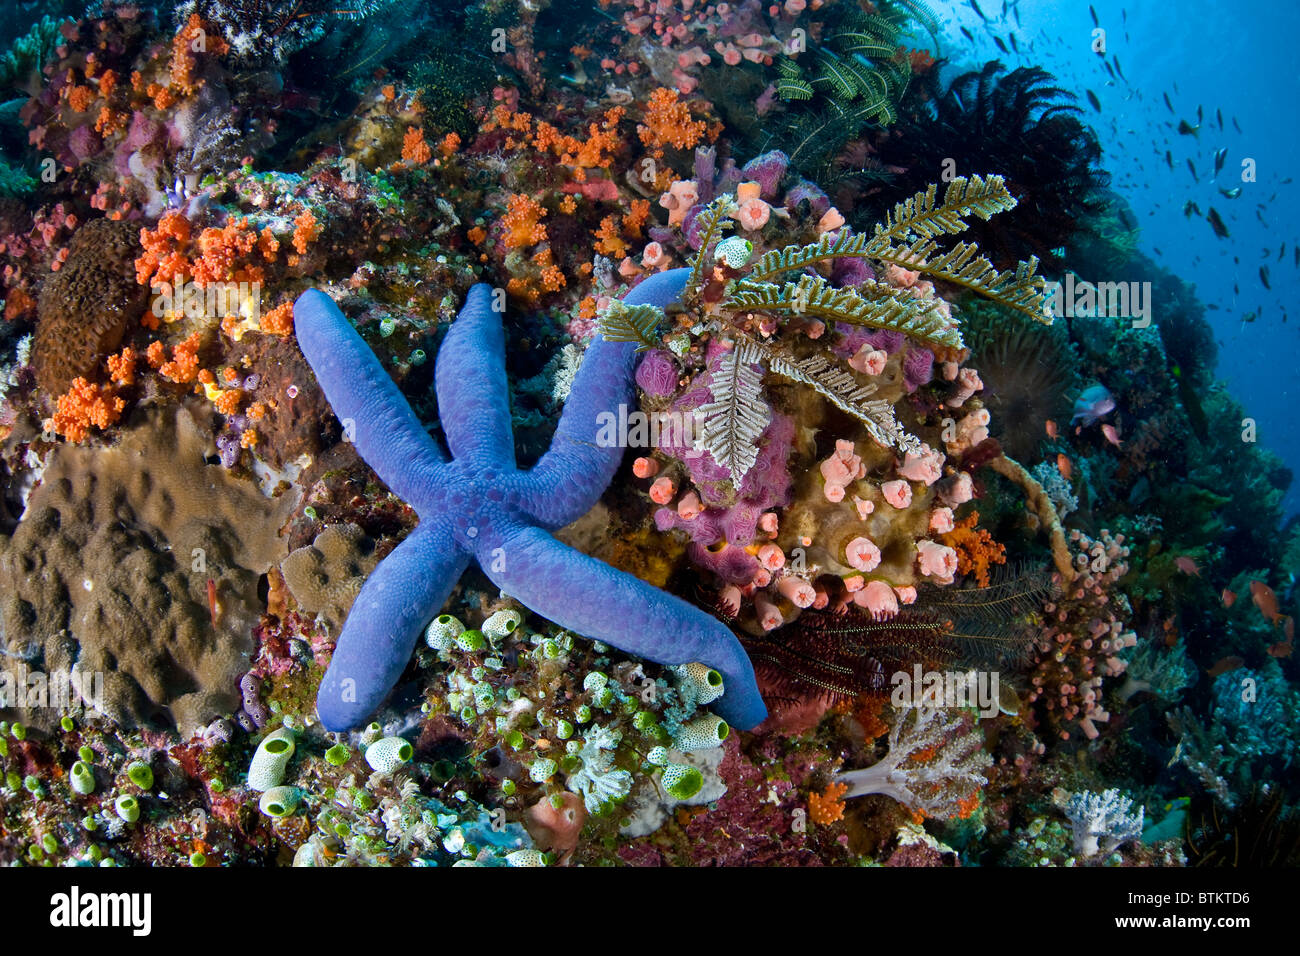 A blue seastar, Linkia laevigata, adds color and texture to a diverse coral reef in Indonesia. Stock Photo